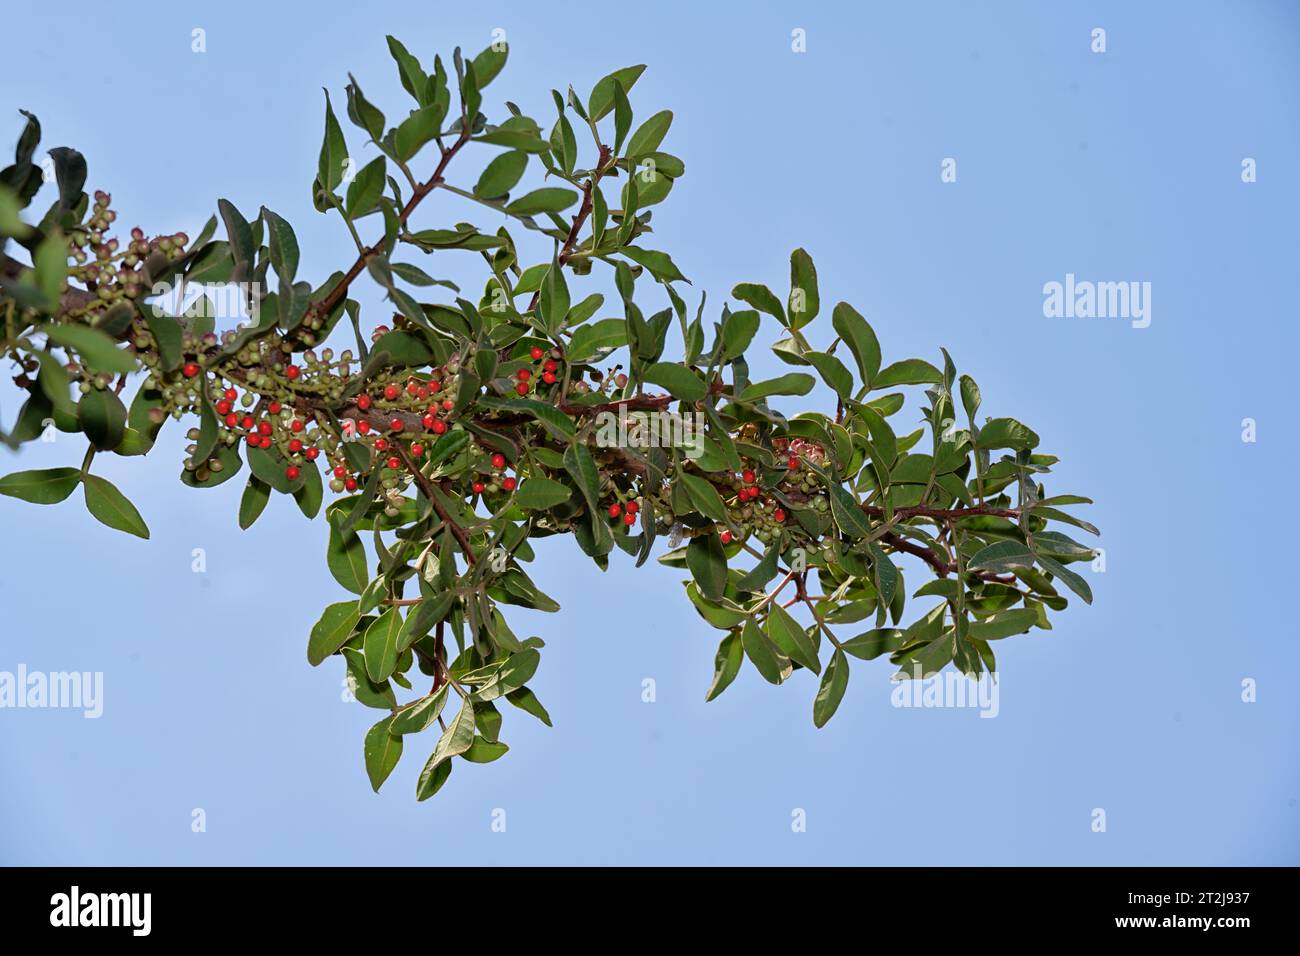 Pistacia lentiscus, also lentisk or mastic, is a dioecious evergreen shrub native to the Mediterranean Basin. Cultivated for its aromatic resin. Mount Stock Photo